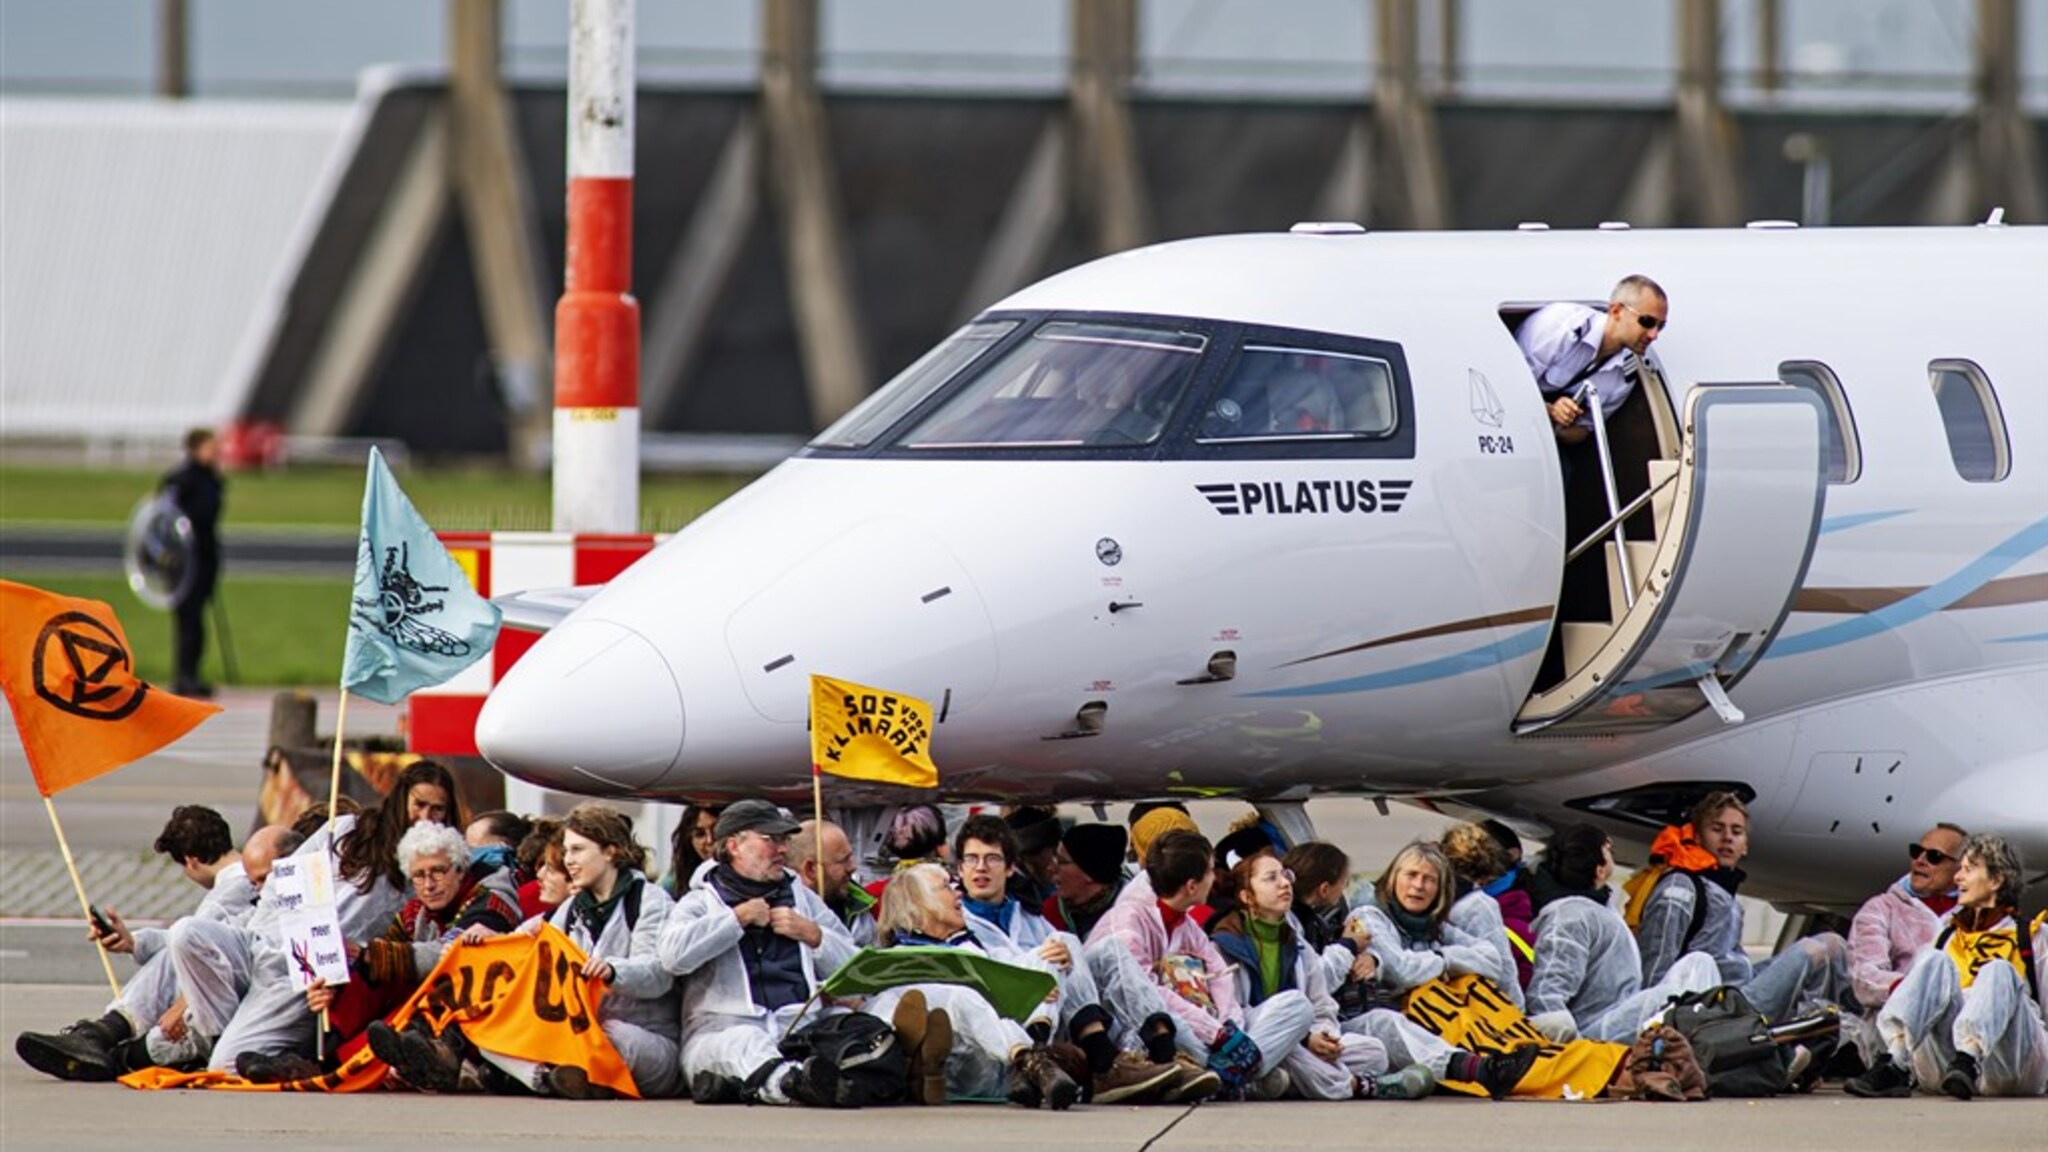 Significant increase in the number of private jets in Schiphol due to Corona and the summer crowds